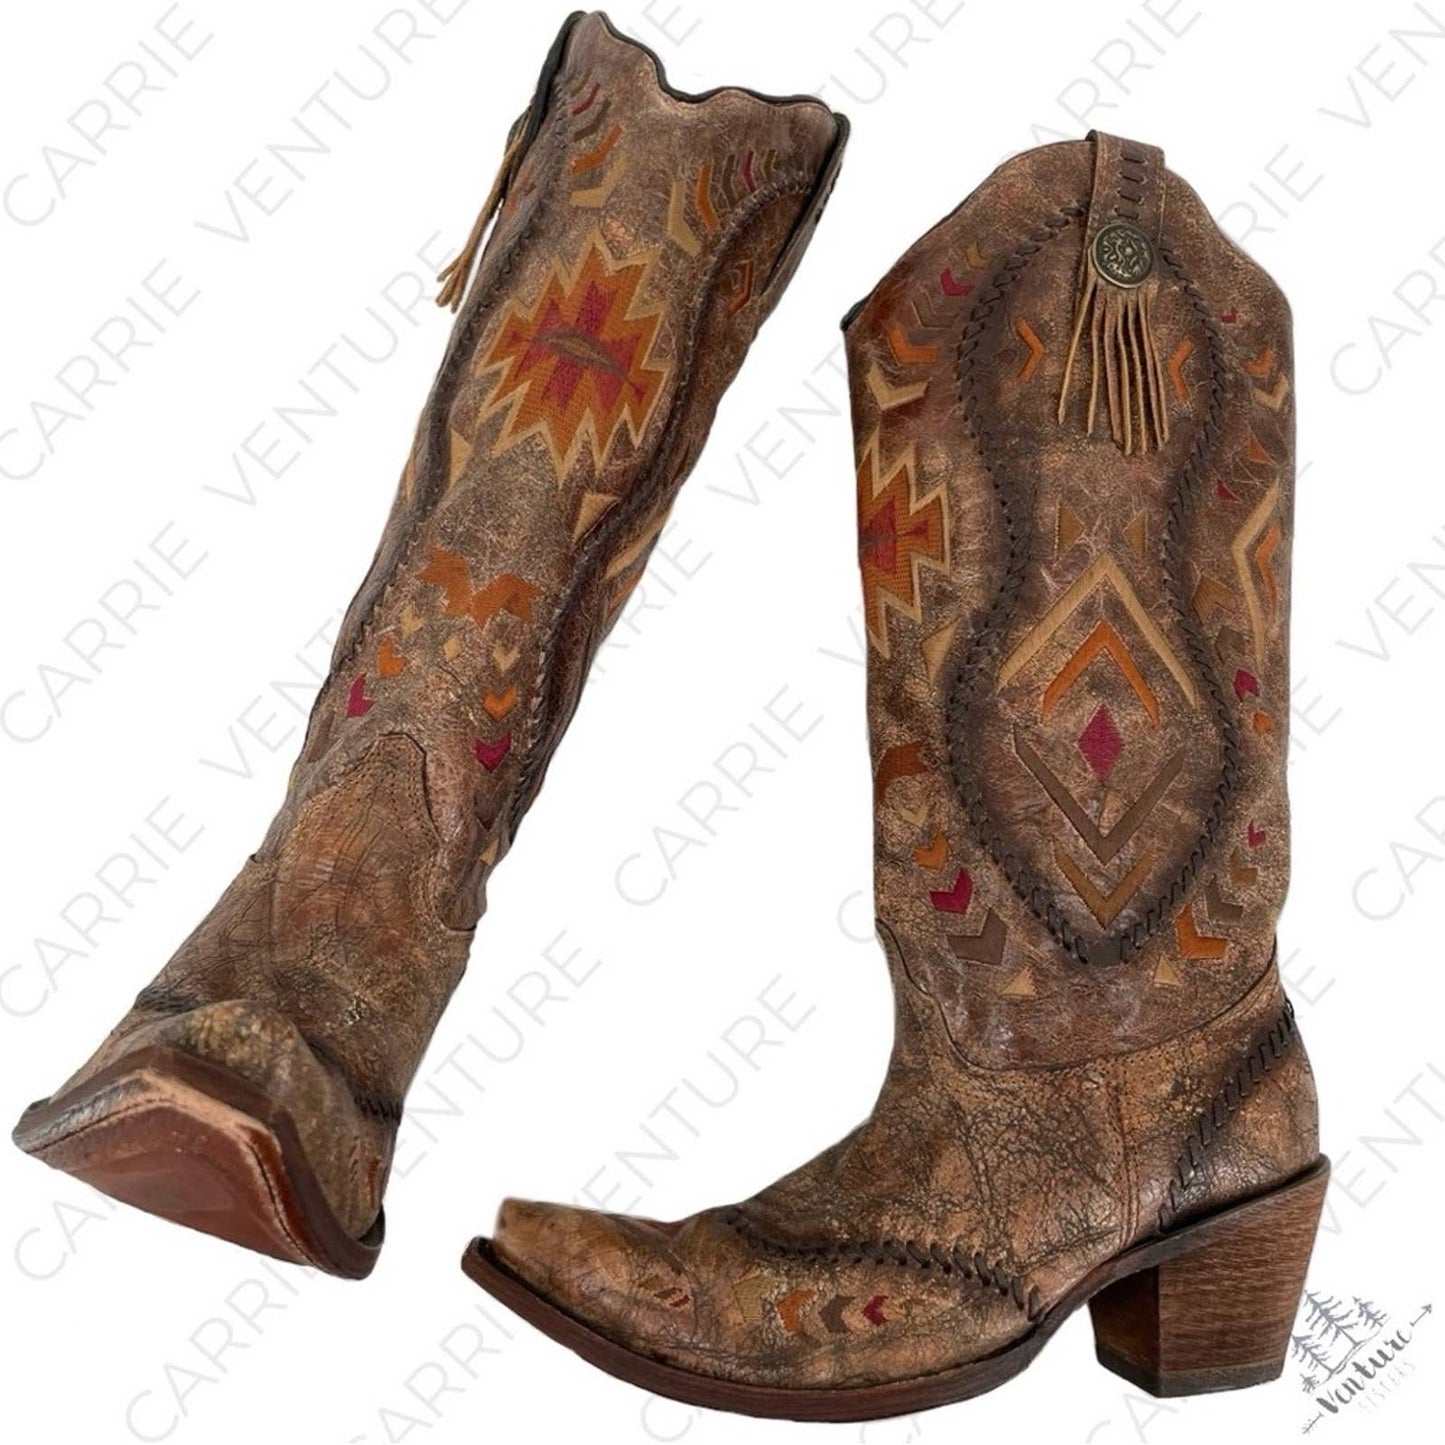 Corral Cowboy Boots Cowgirl Western Southwest Style Embroidered Leather C2872 Size 8